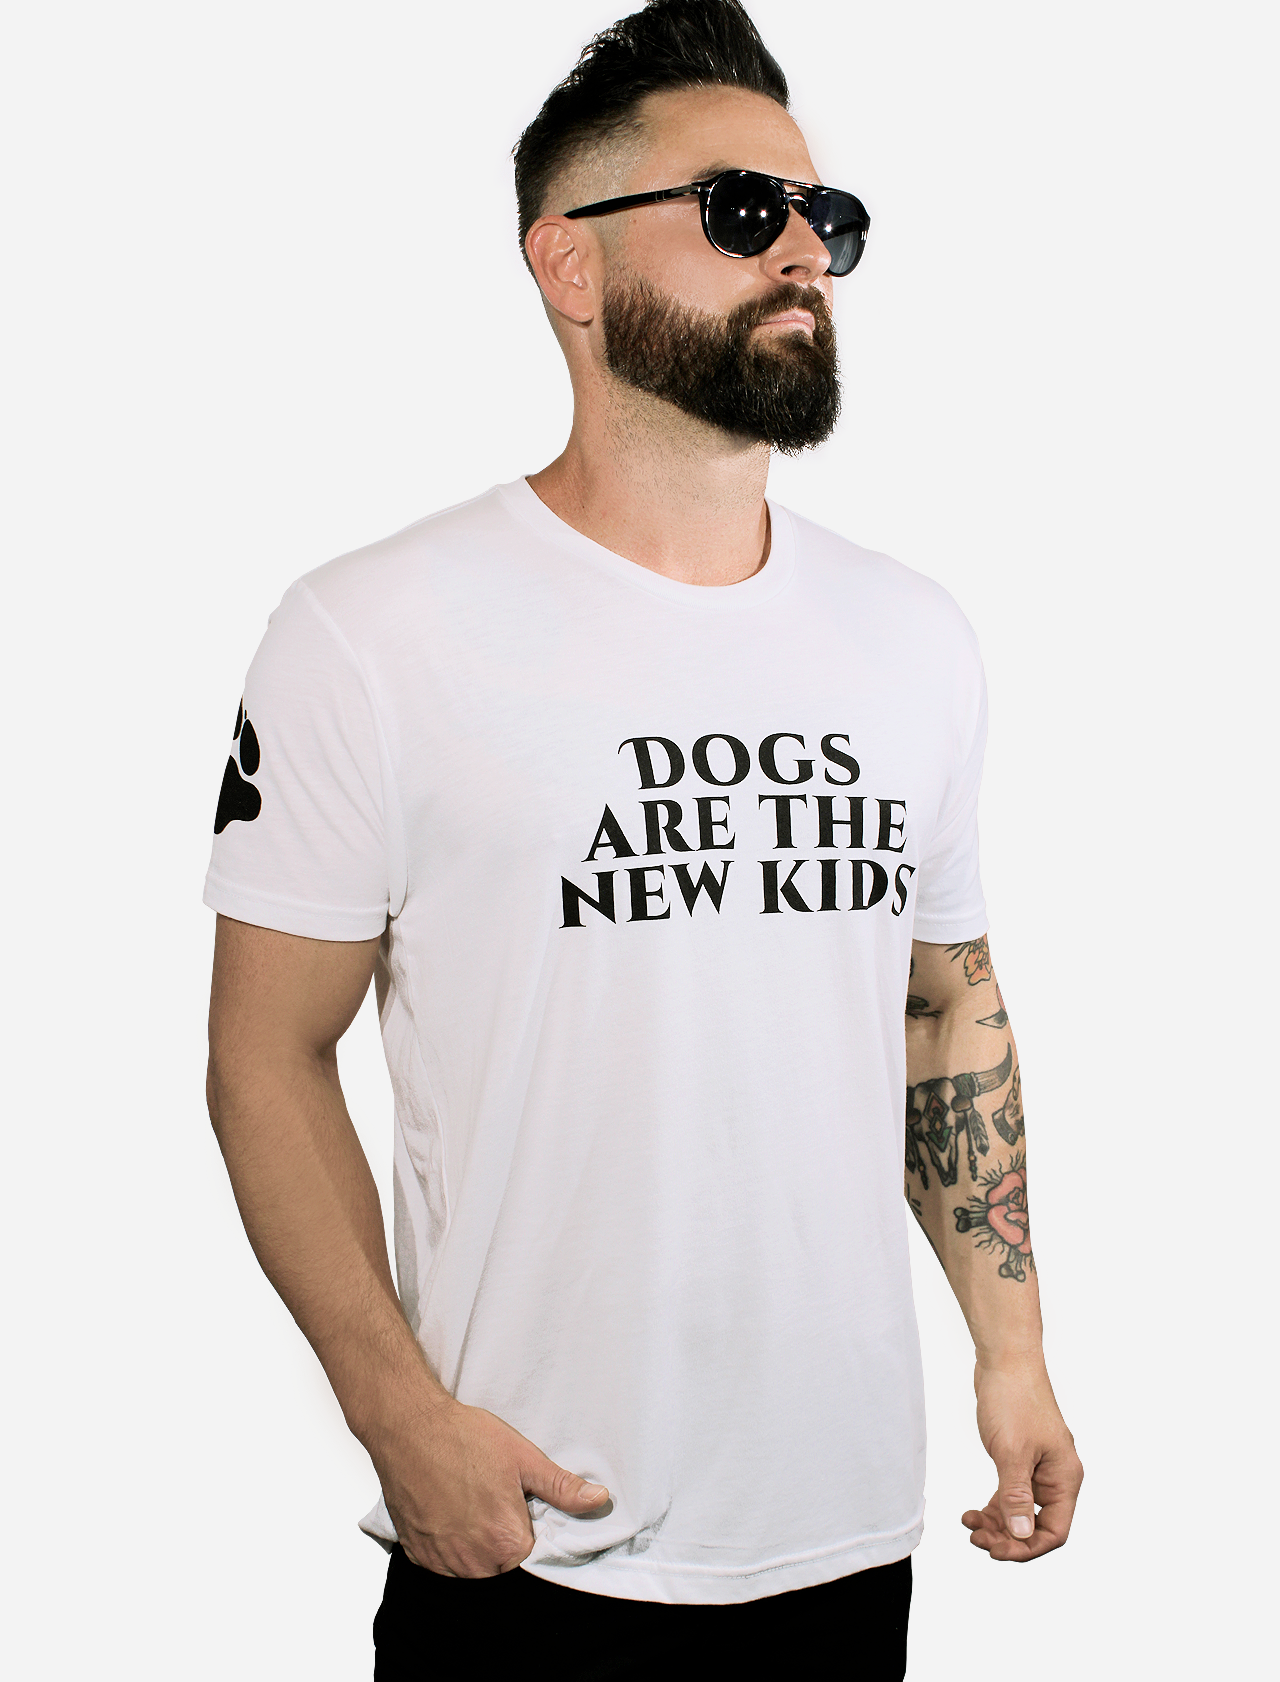 DOGS ARE THE NEW KIDS T-Shirt